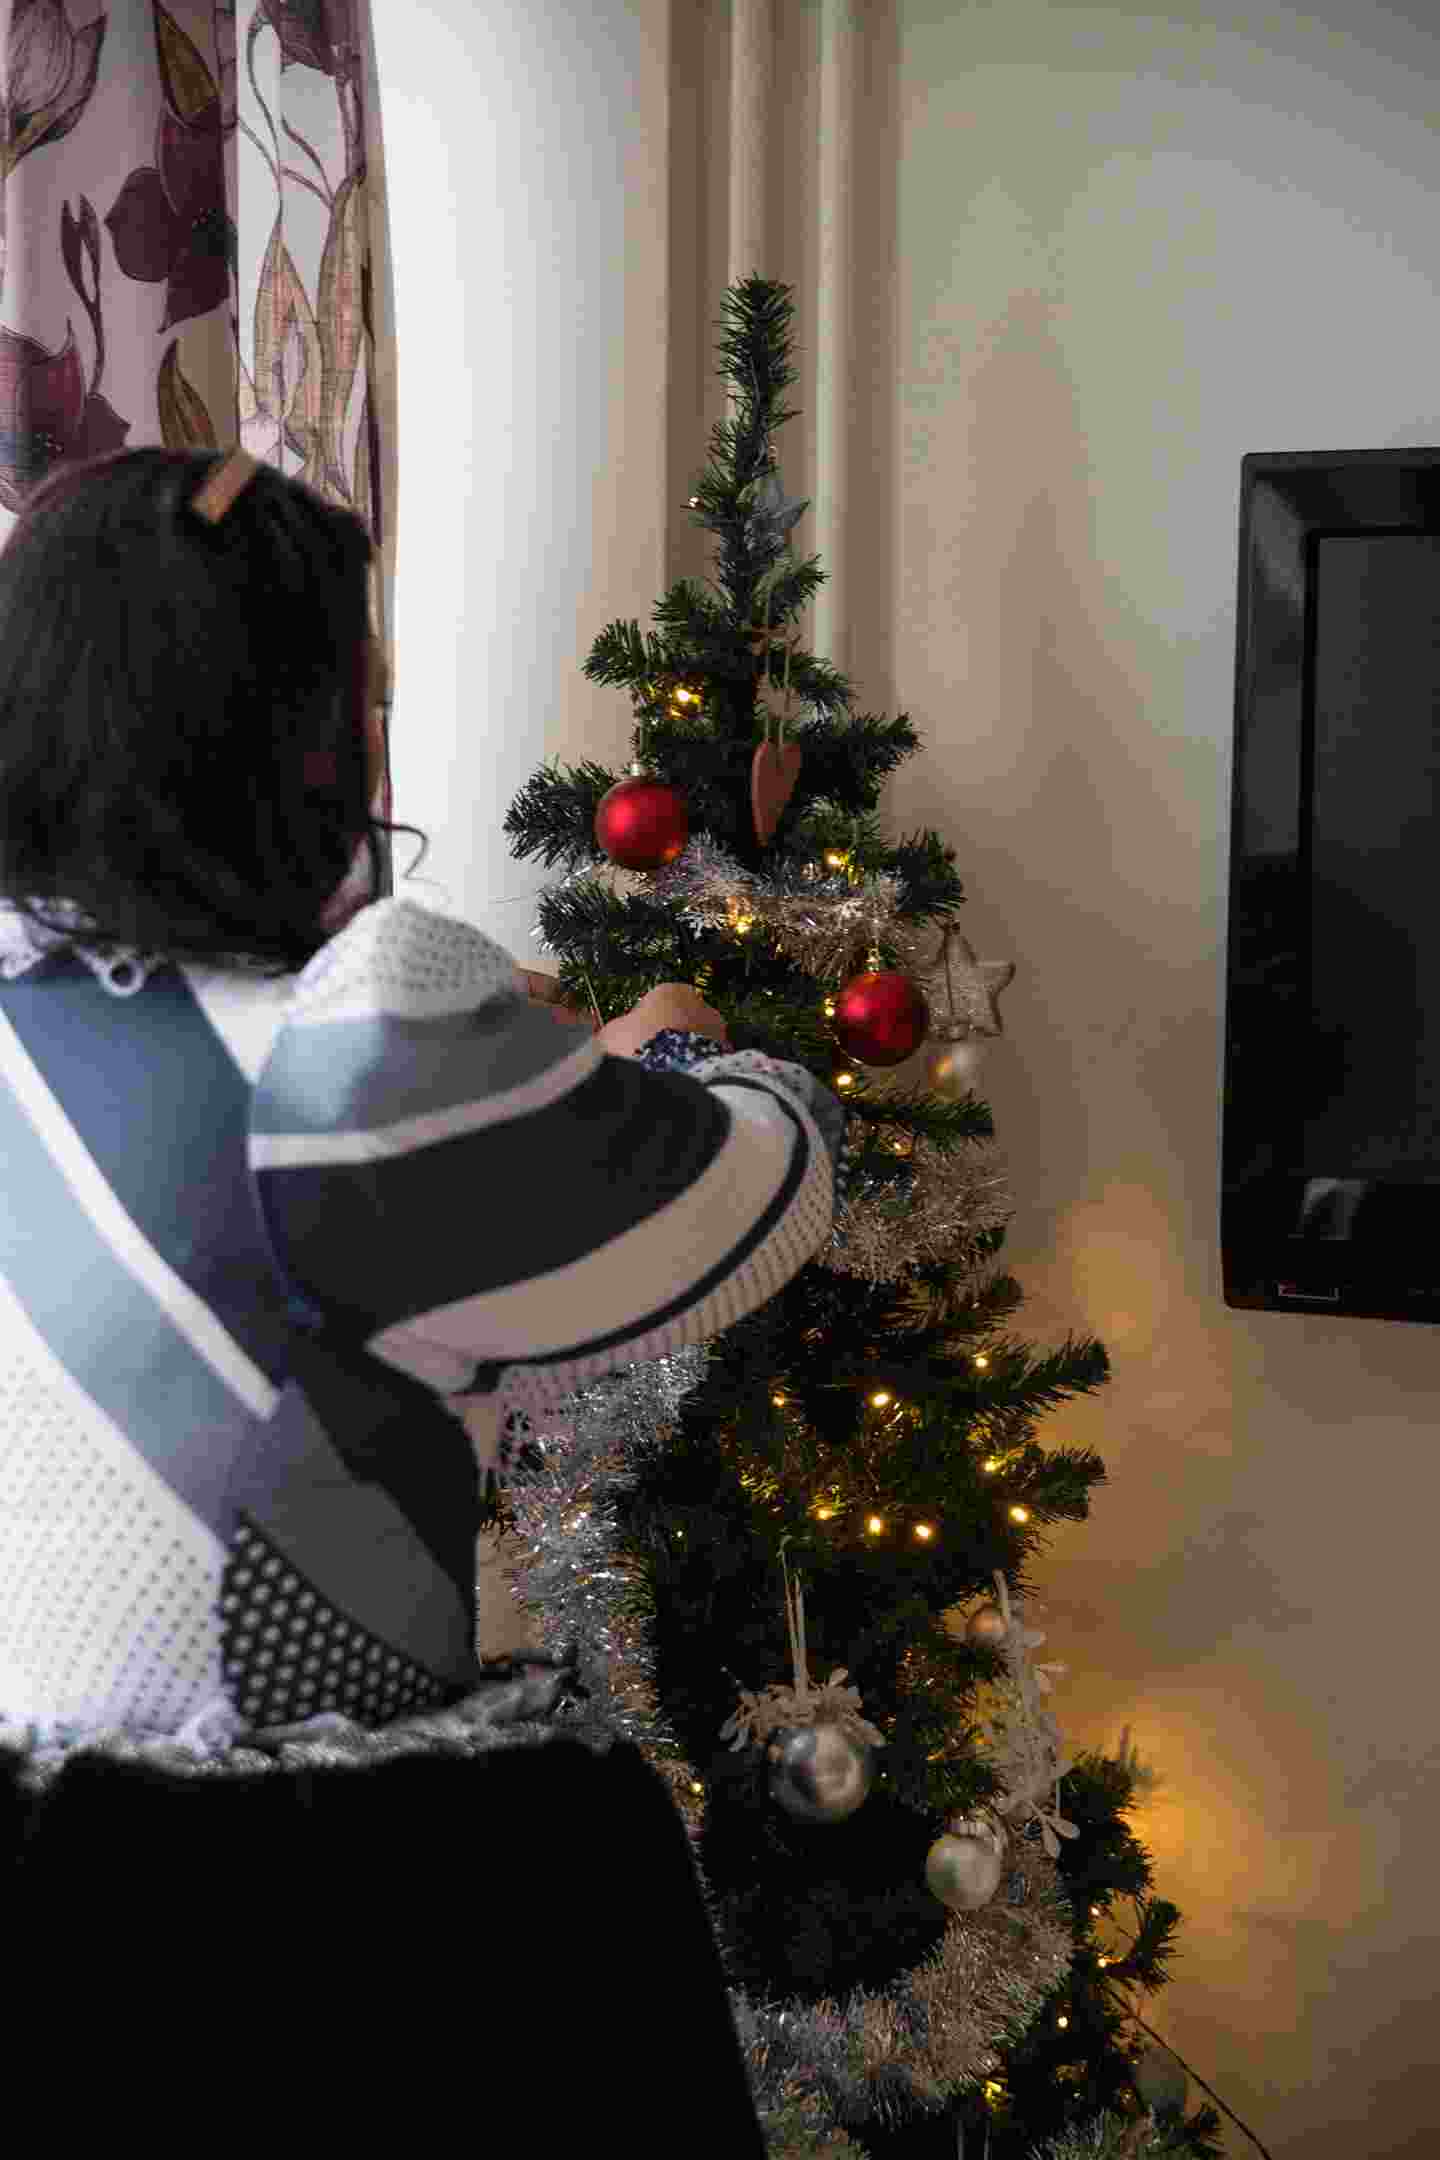 A person decorating a Christmas tree.